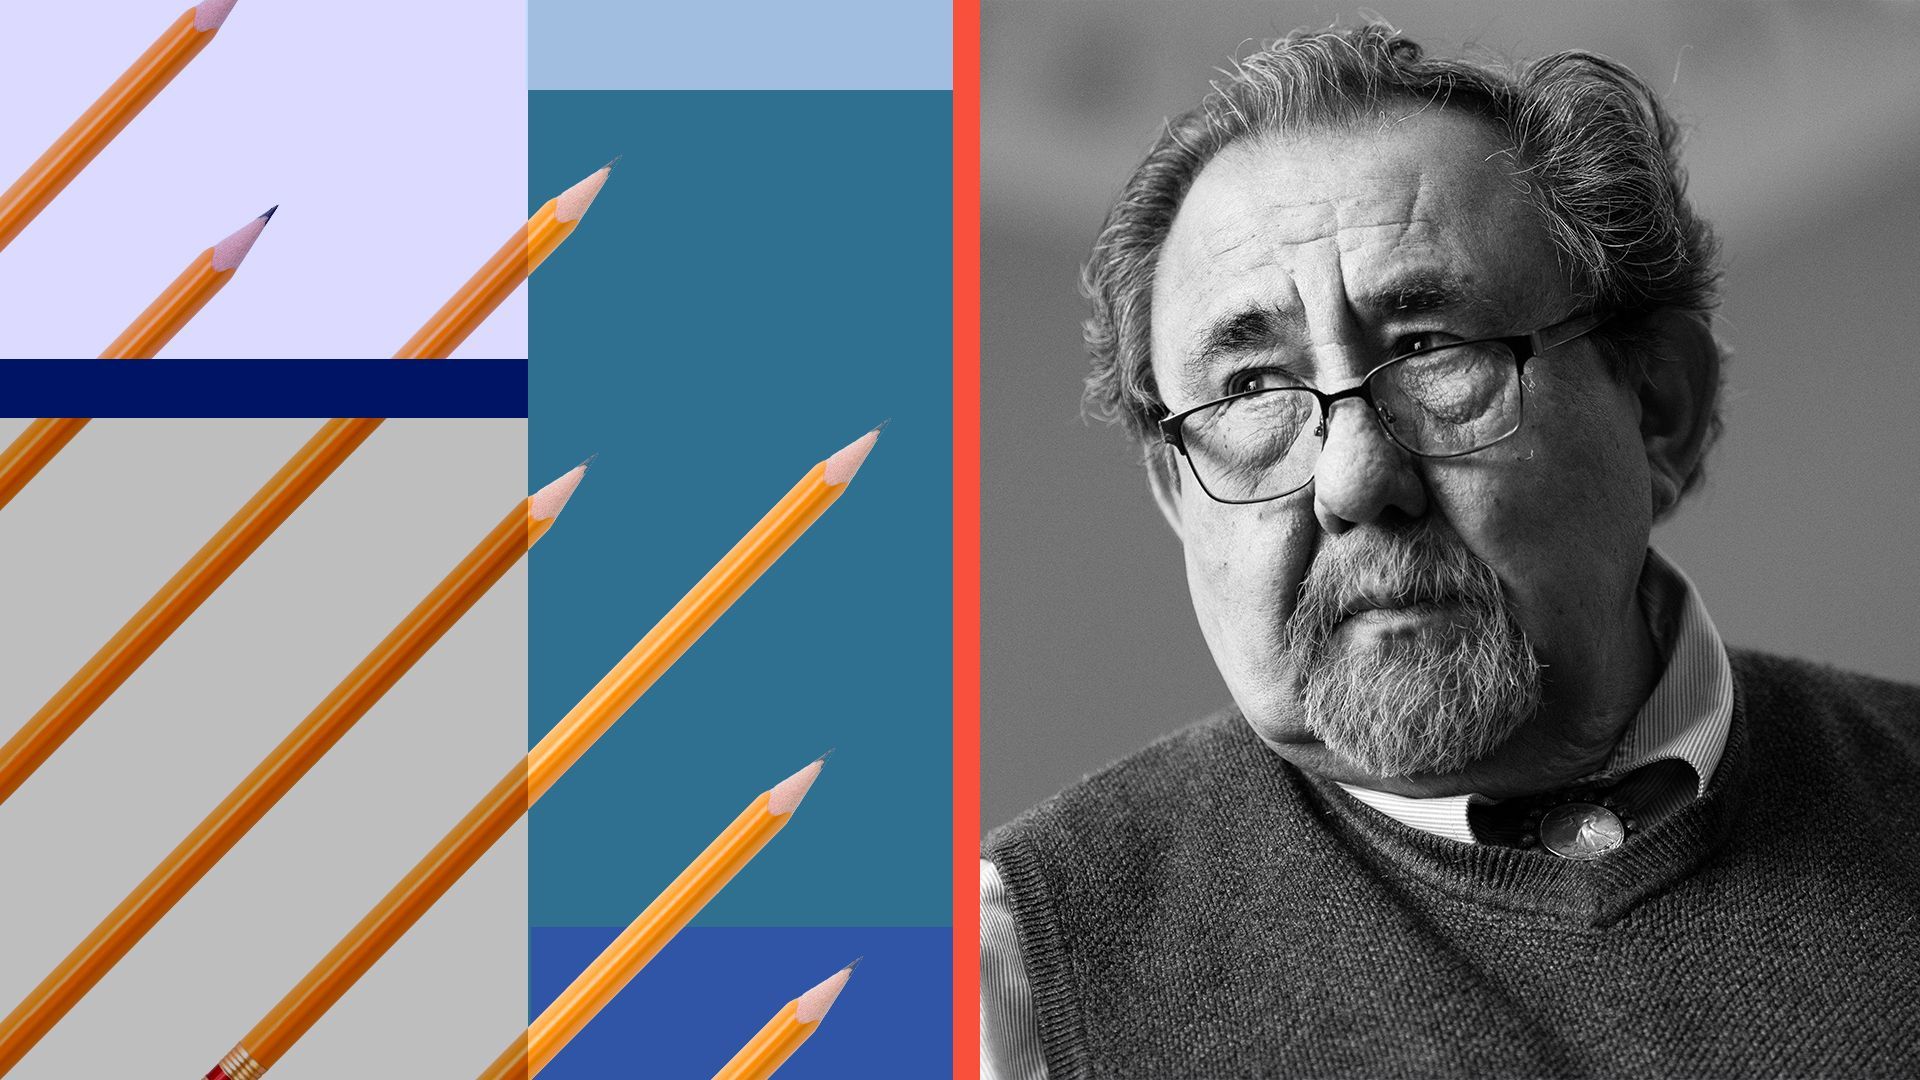 Photo illustration of Raul Grijalva with #2 pencils and abstract shapes.